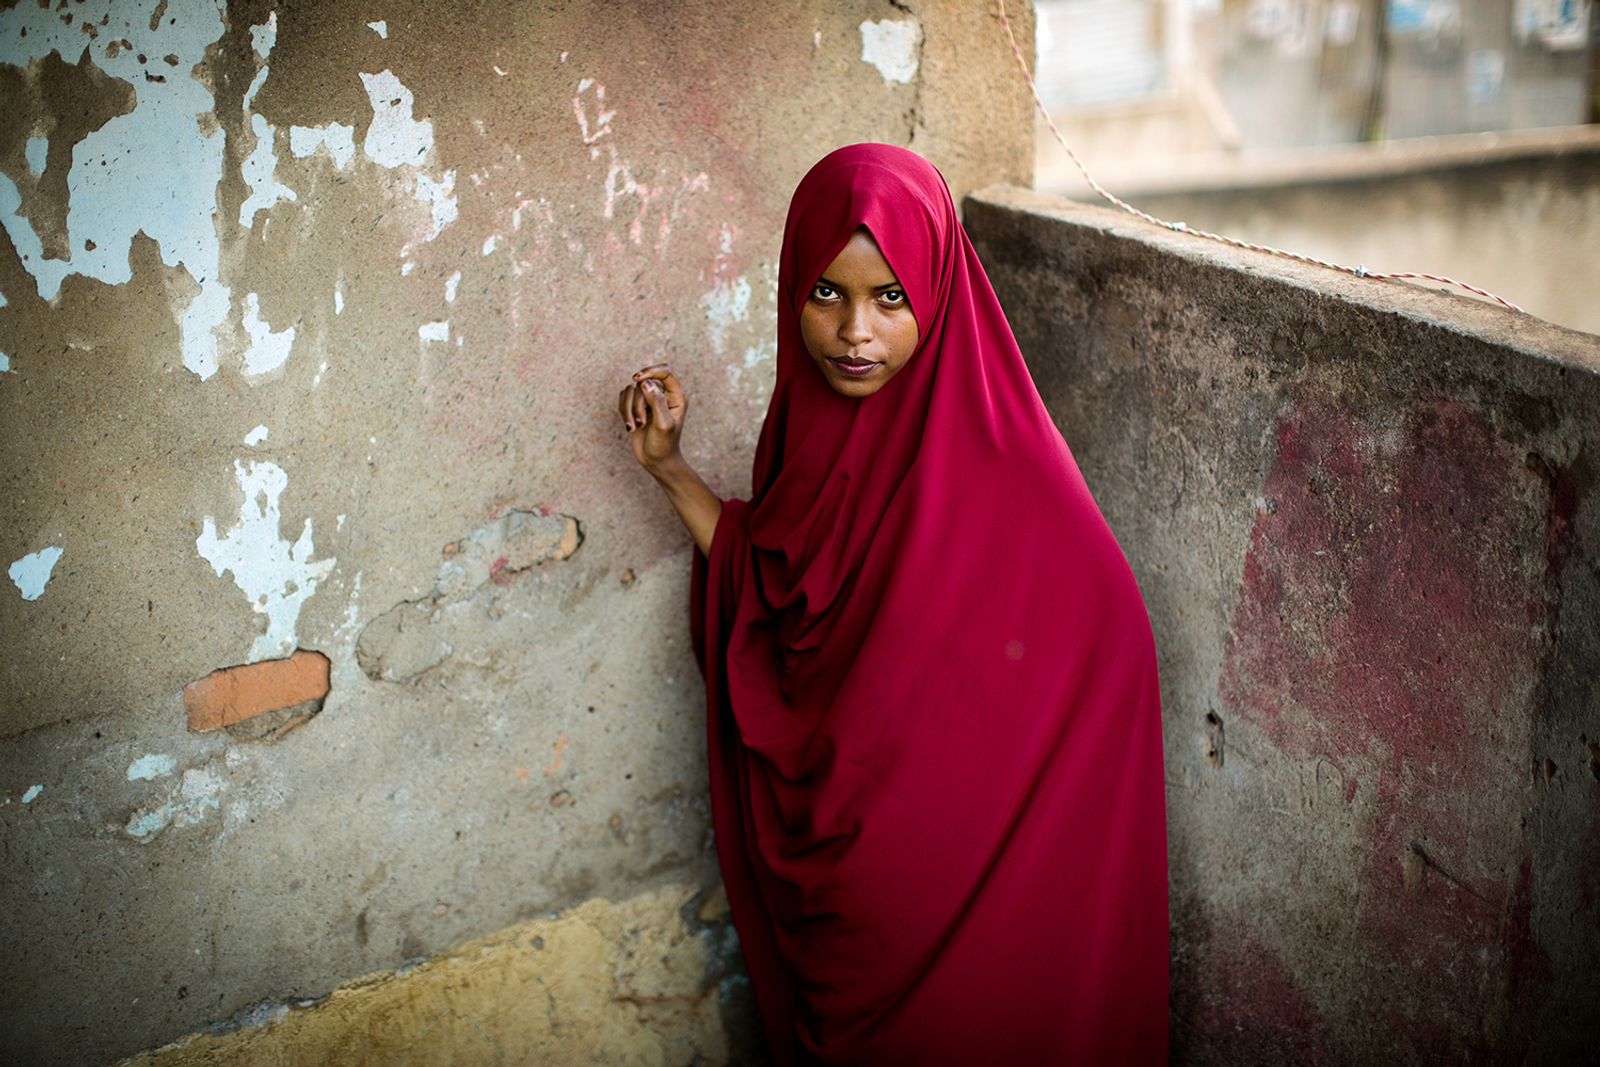 © Anne Ackermann - Image from the Behind Veils and Walls - Women in Little Mogadishu photography project